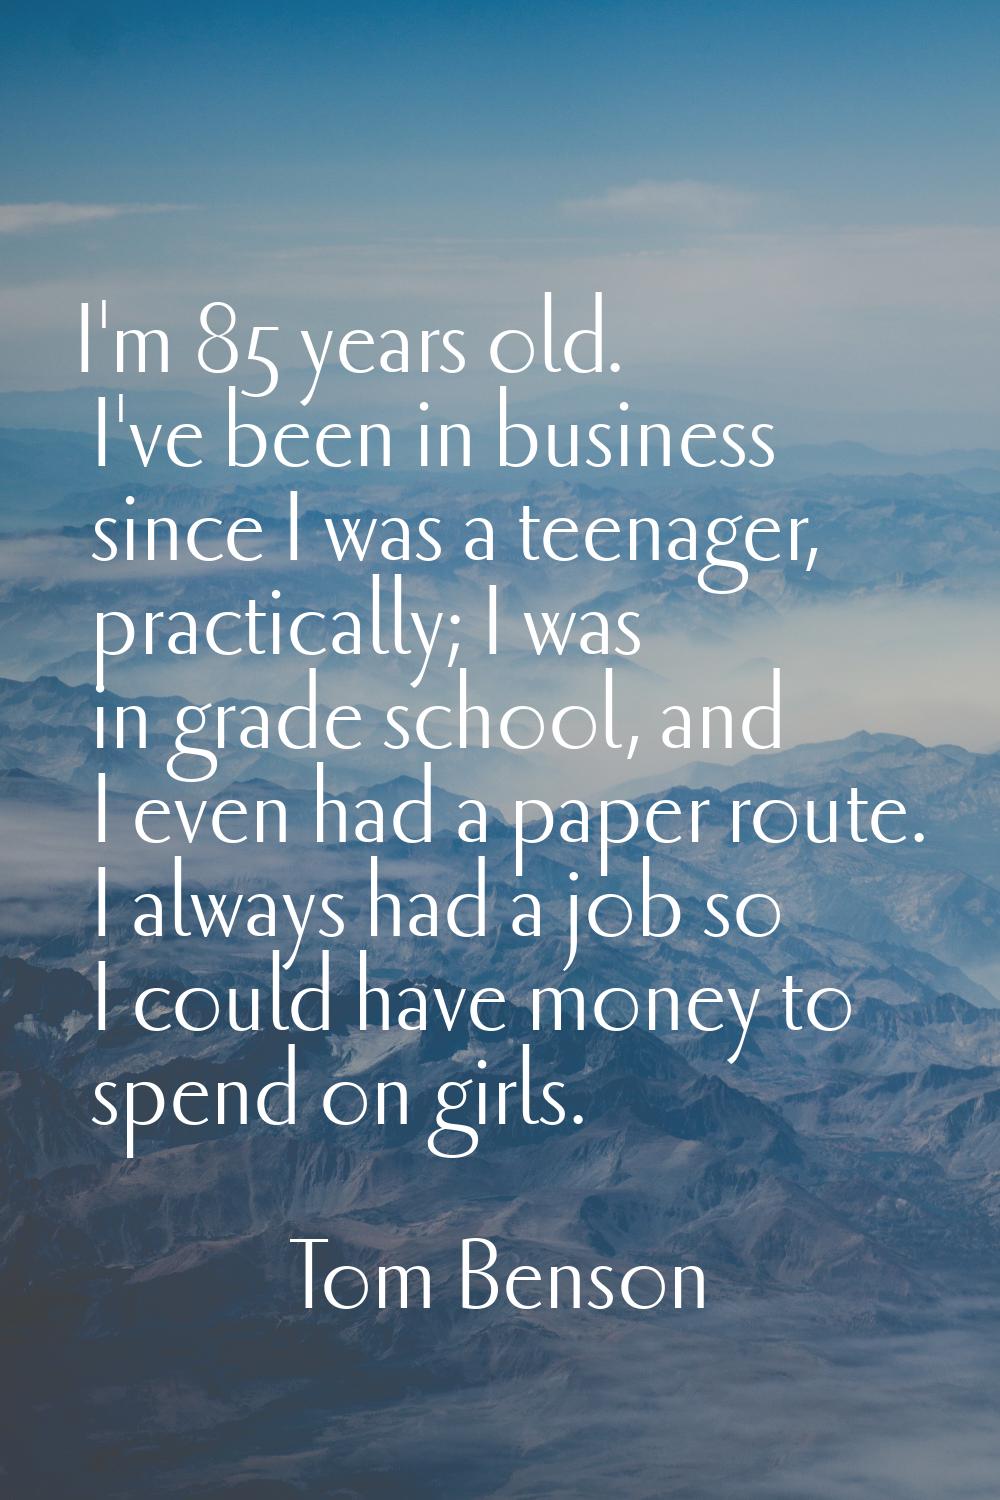 I'm 85 years old. I've been in business since I was a teenager, practically; I was in grade school,